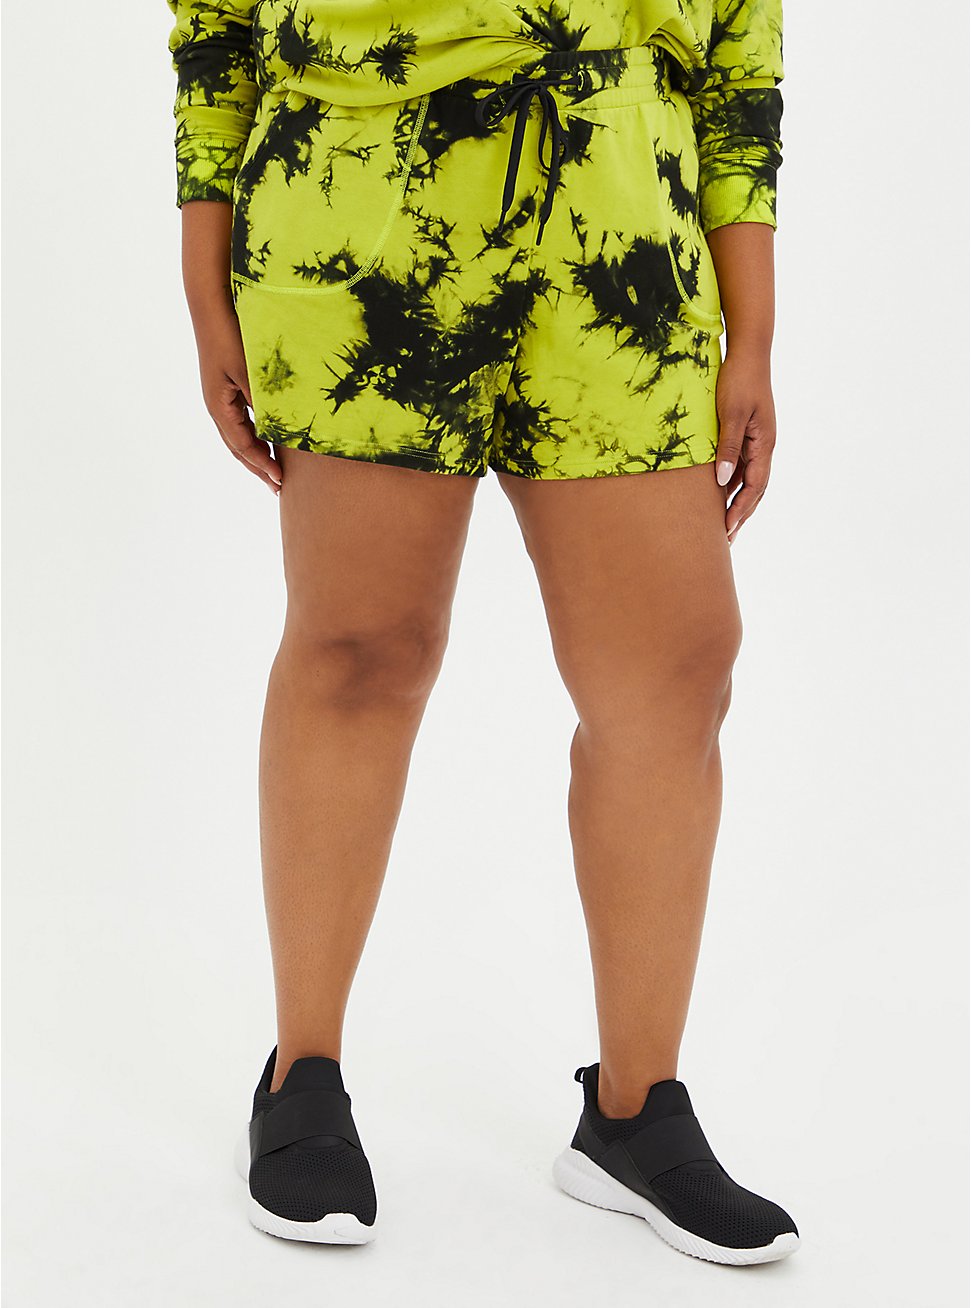 Plus Size Green French Terry Tie Dye Active Short, TIE DYE, hi-res